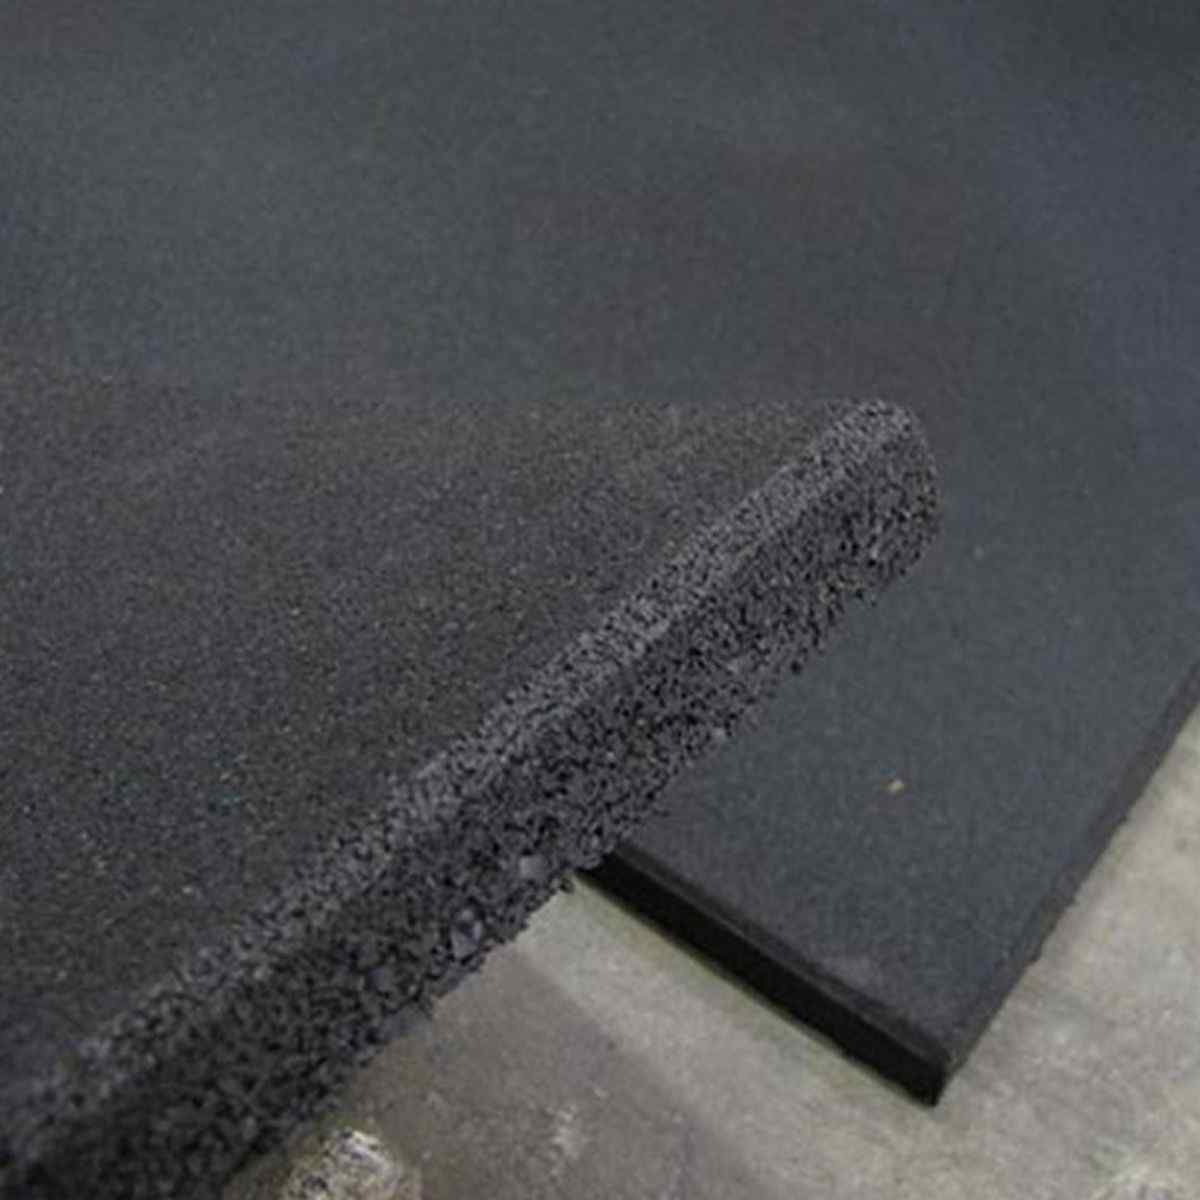 RUBBER GYM MAT FLOORING 1M X 1M X 15MM - Extreme Fitness